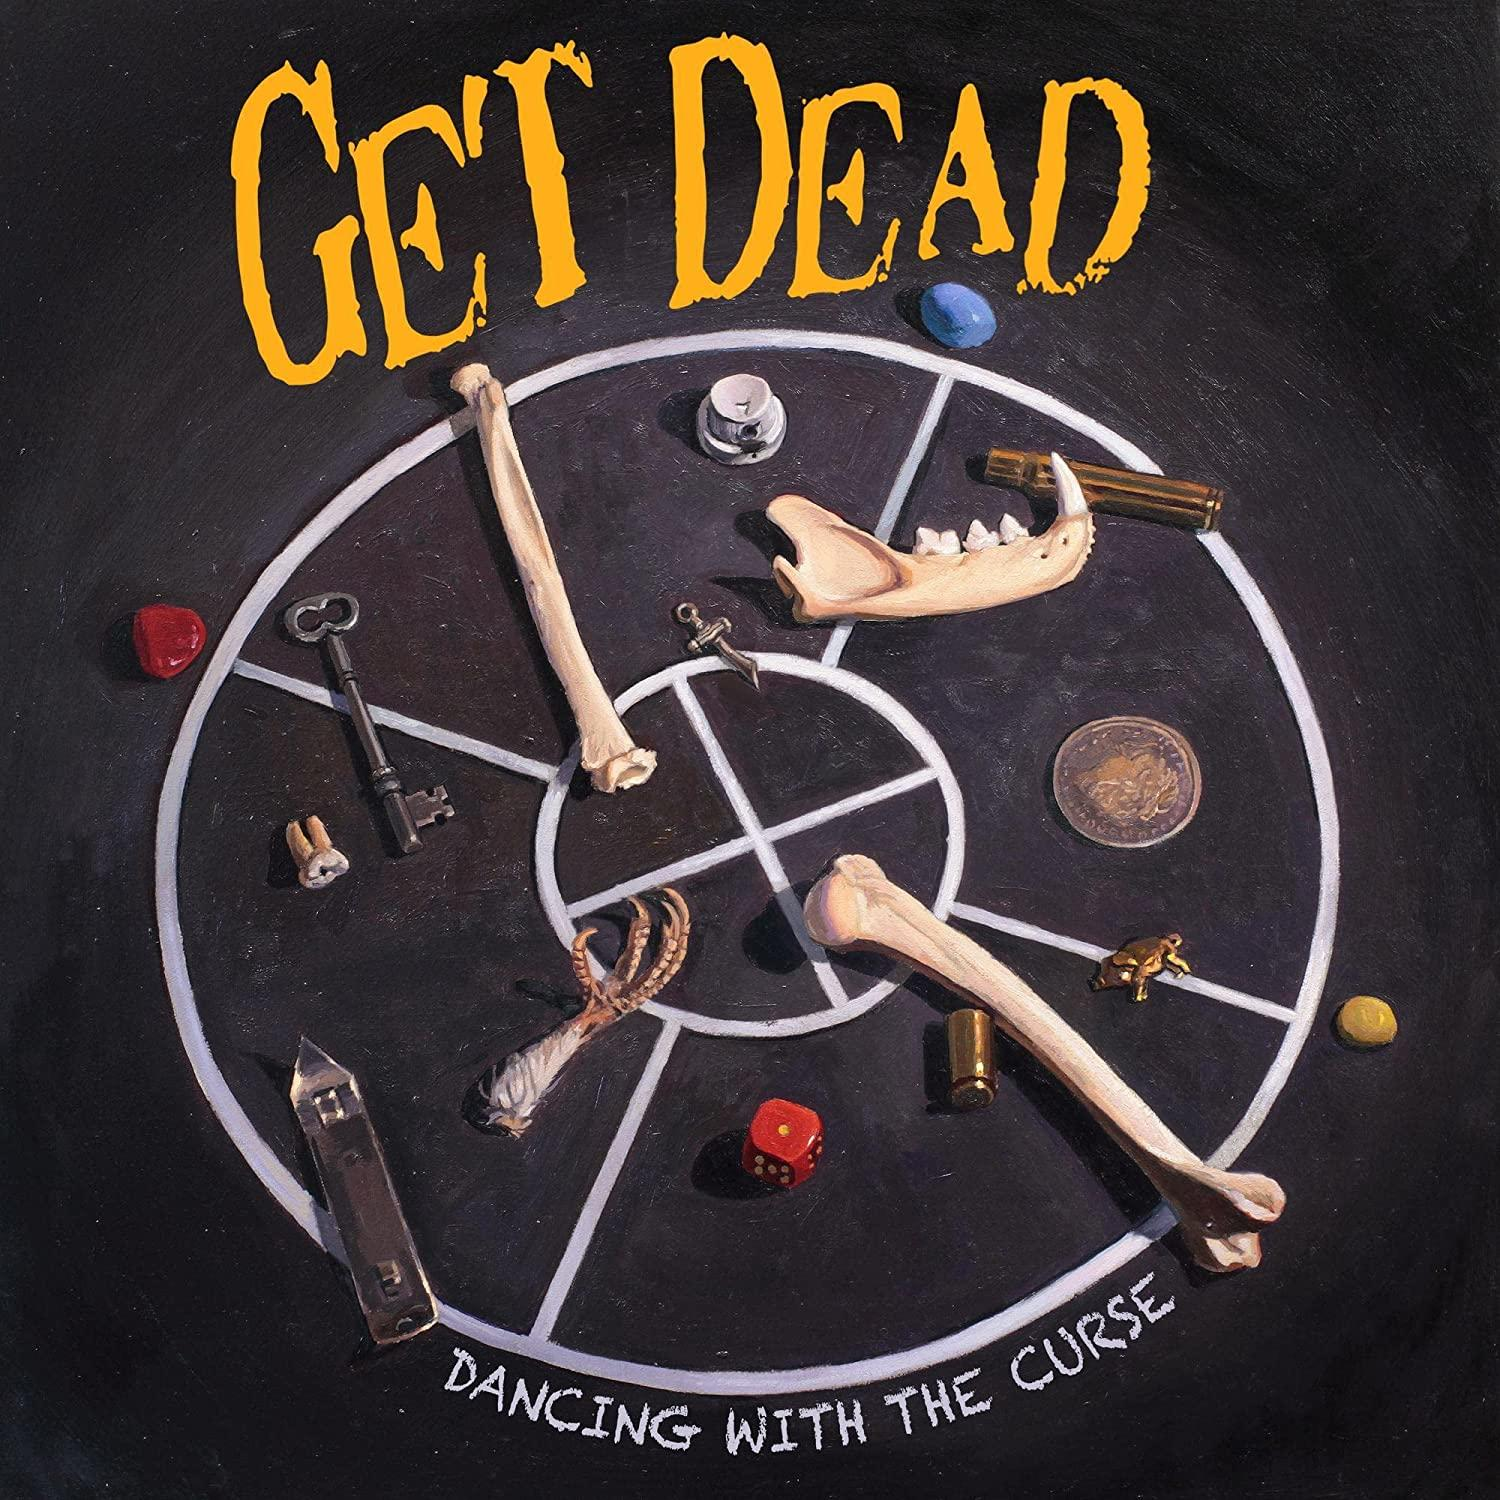 Get Dead Dancing Download) - (LP The Curse + - With